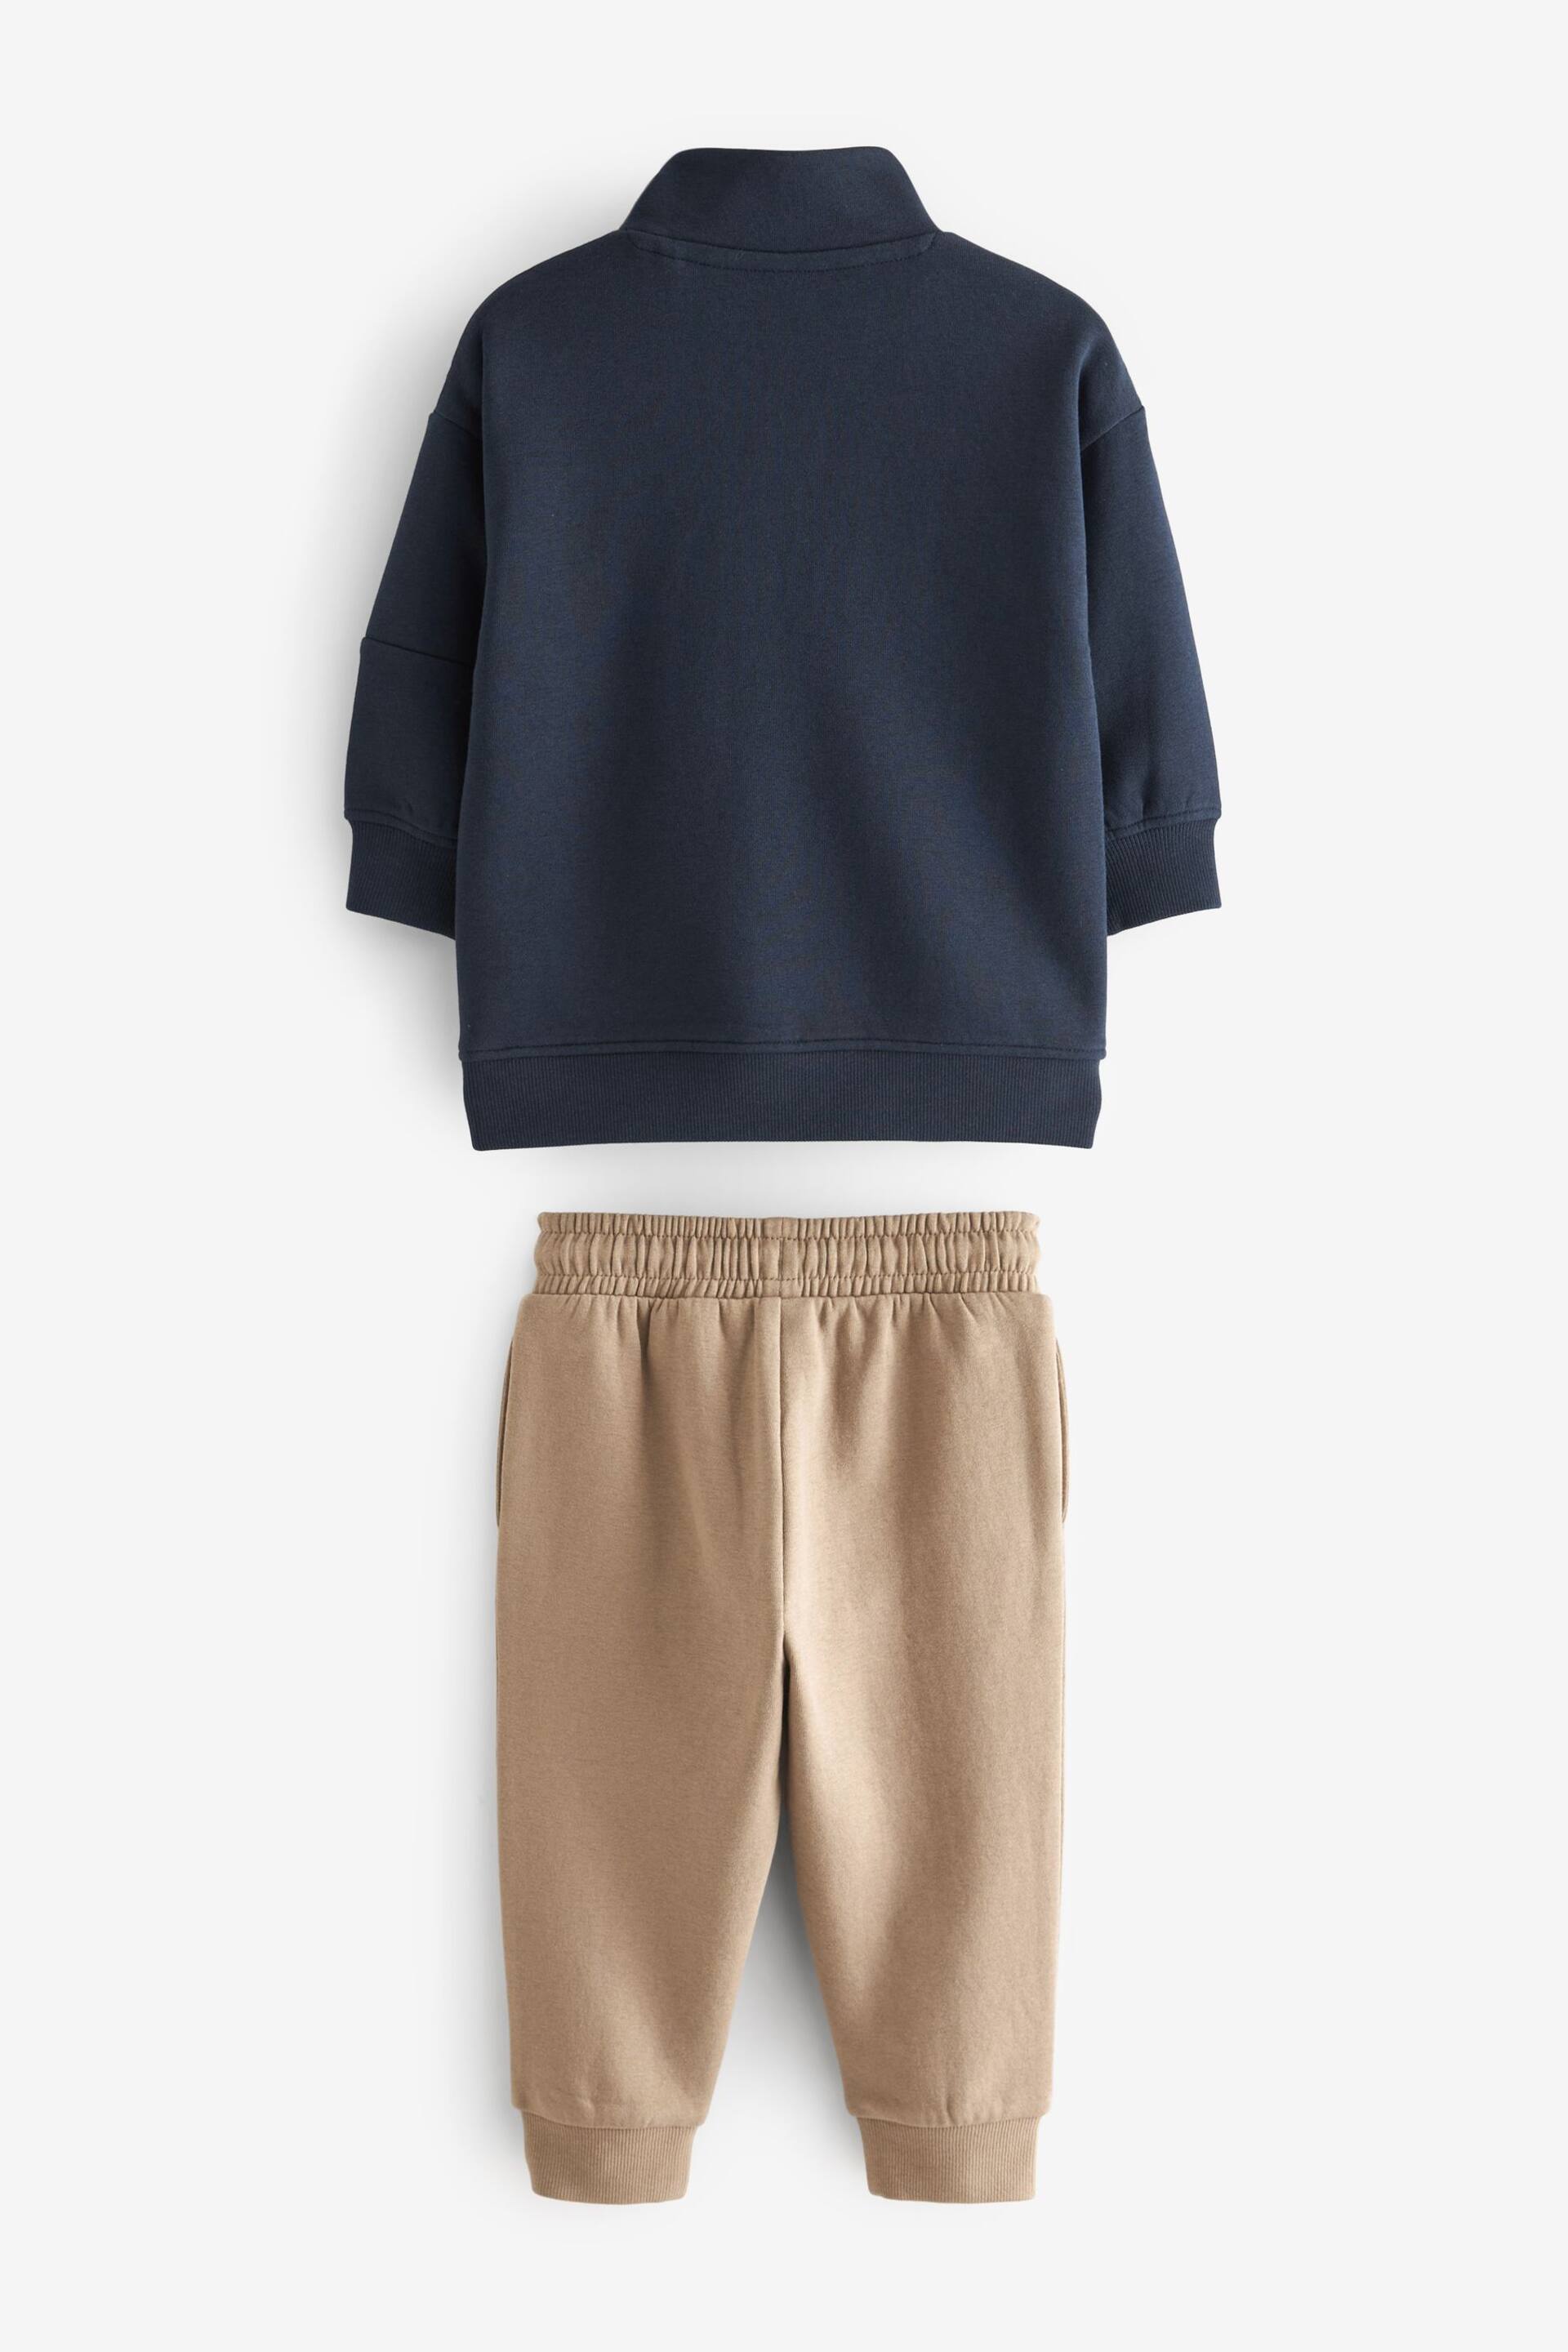 Blue/ stone Funnel Neck Sweatshirt and Jogger Set (3mths-7yrs) - Image 7 of 8